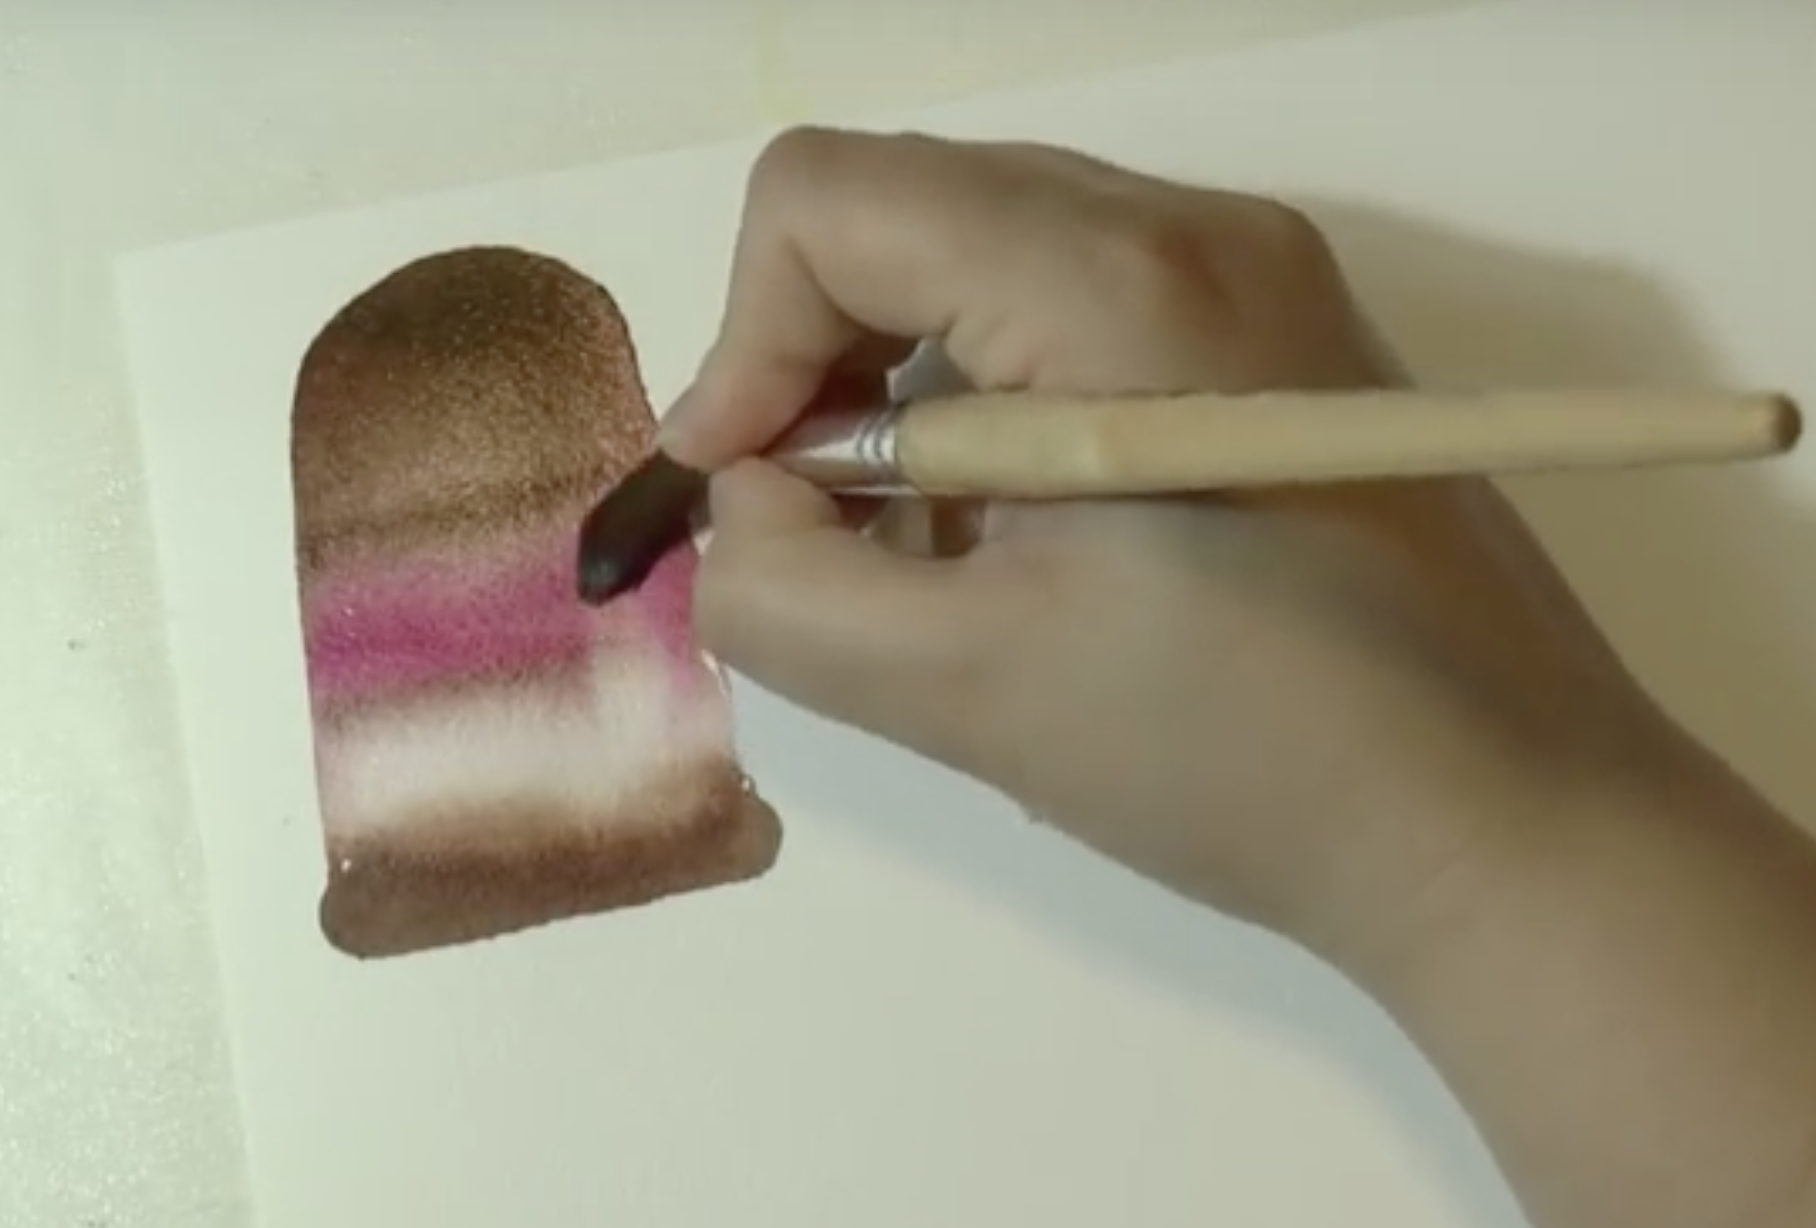 easy-watercolor-ideas-techniques-how-to-paint-a-watercolor-popsicle - Step 8